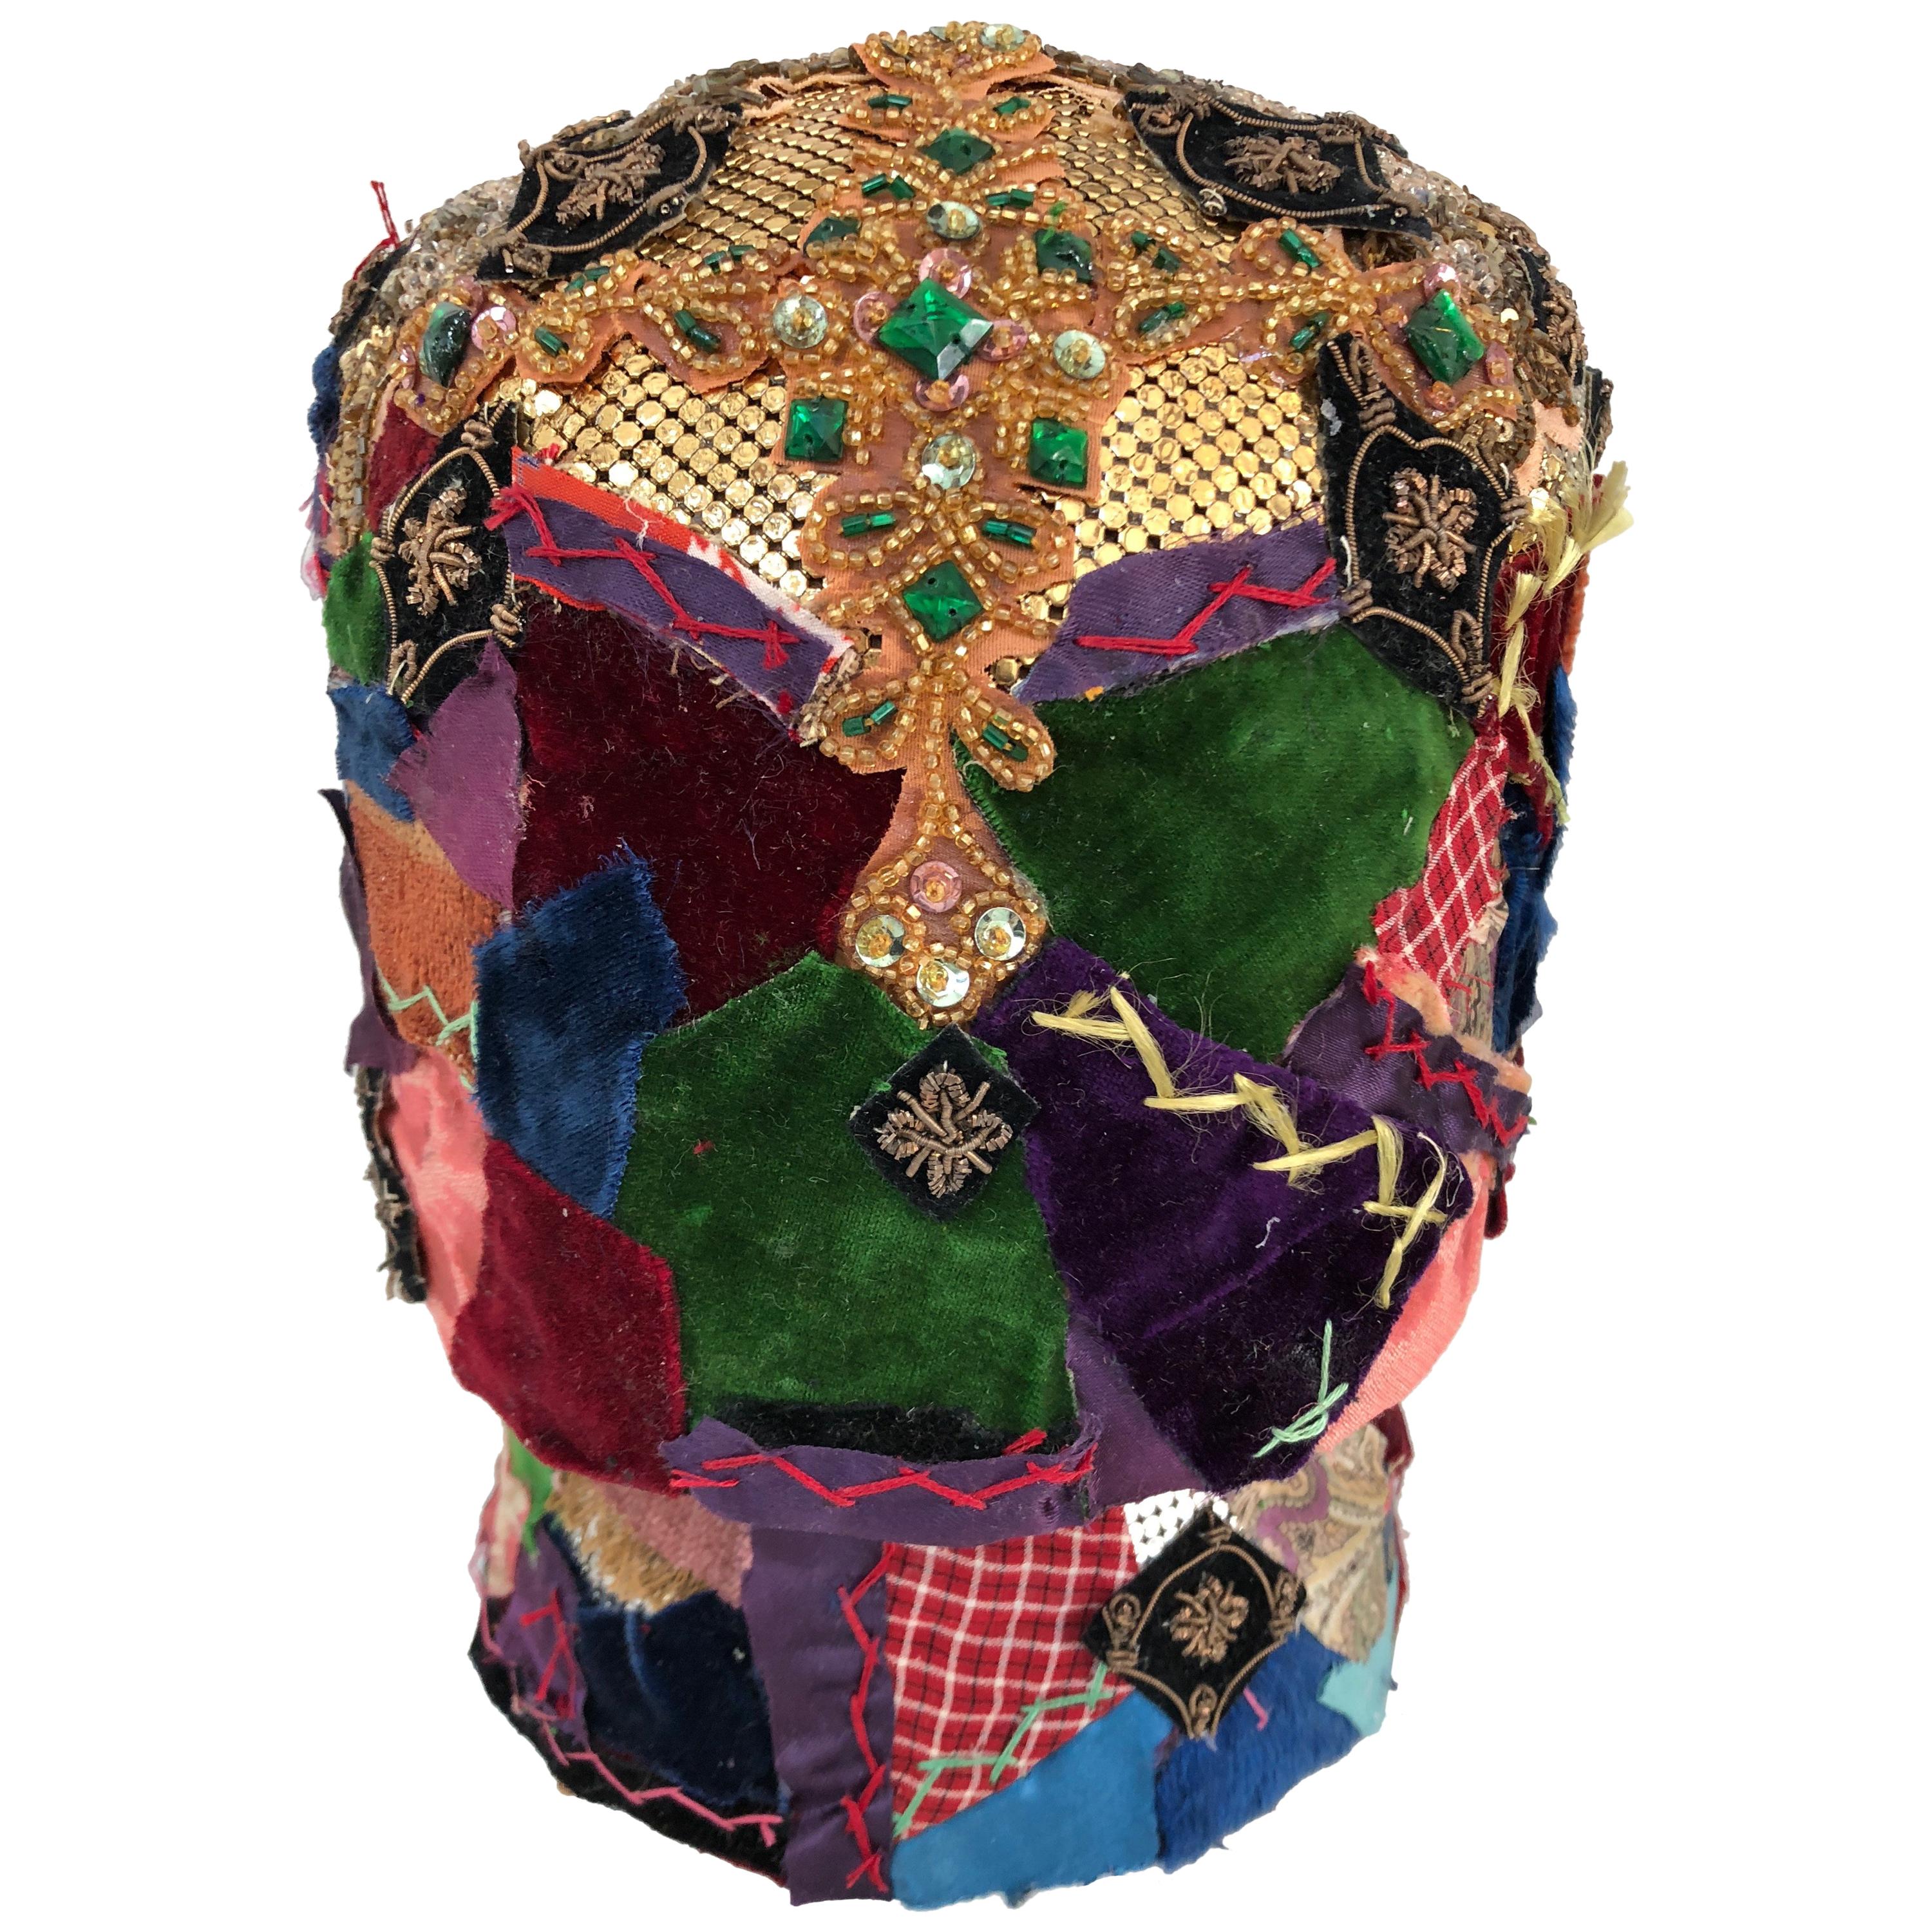 Gorgeous Mixed-Media Crazy Quilt and Gold Lame Head Sculpture